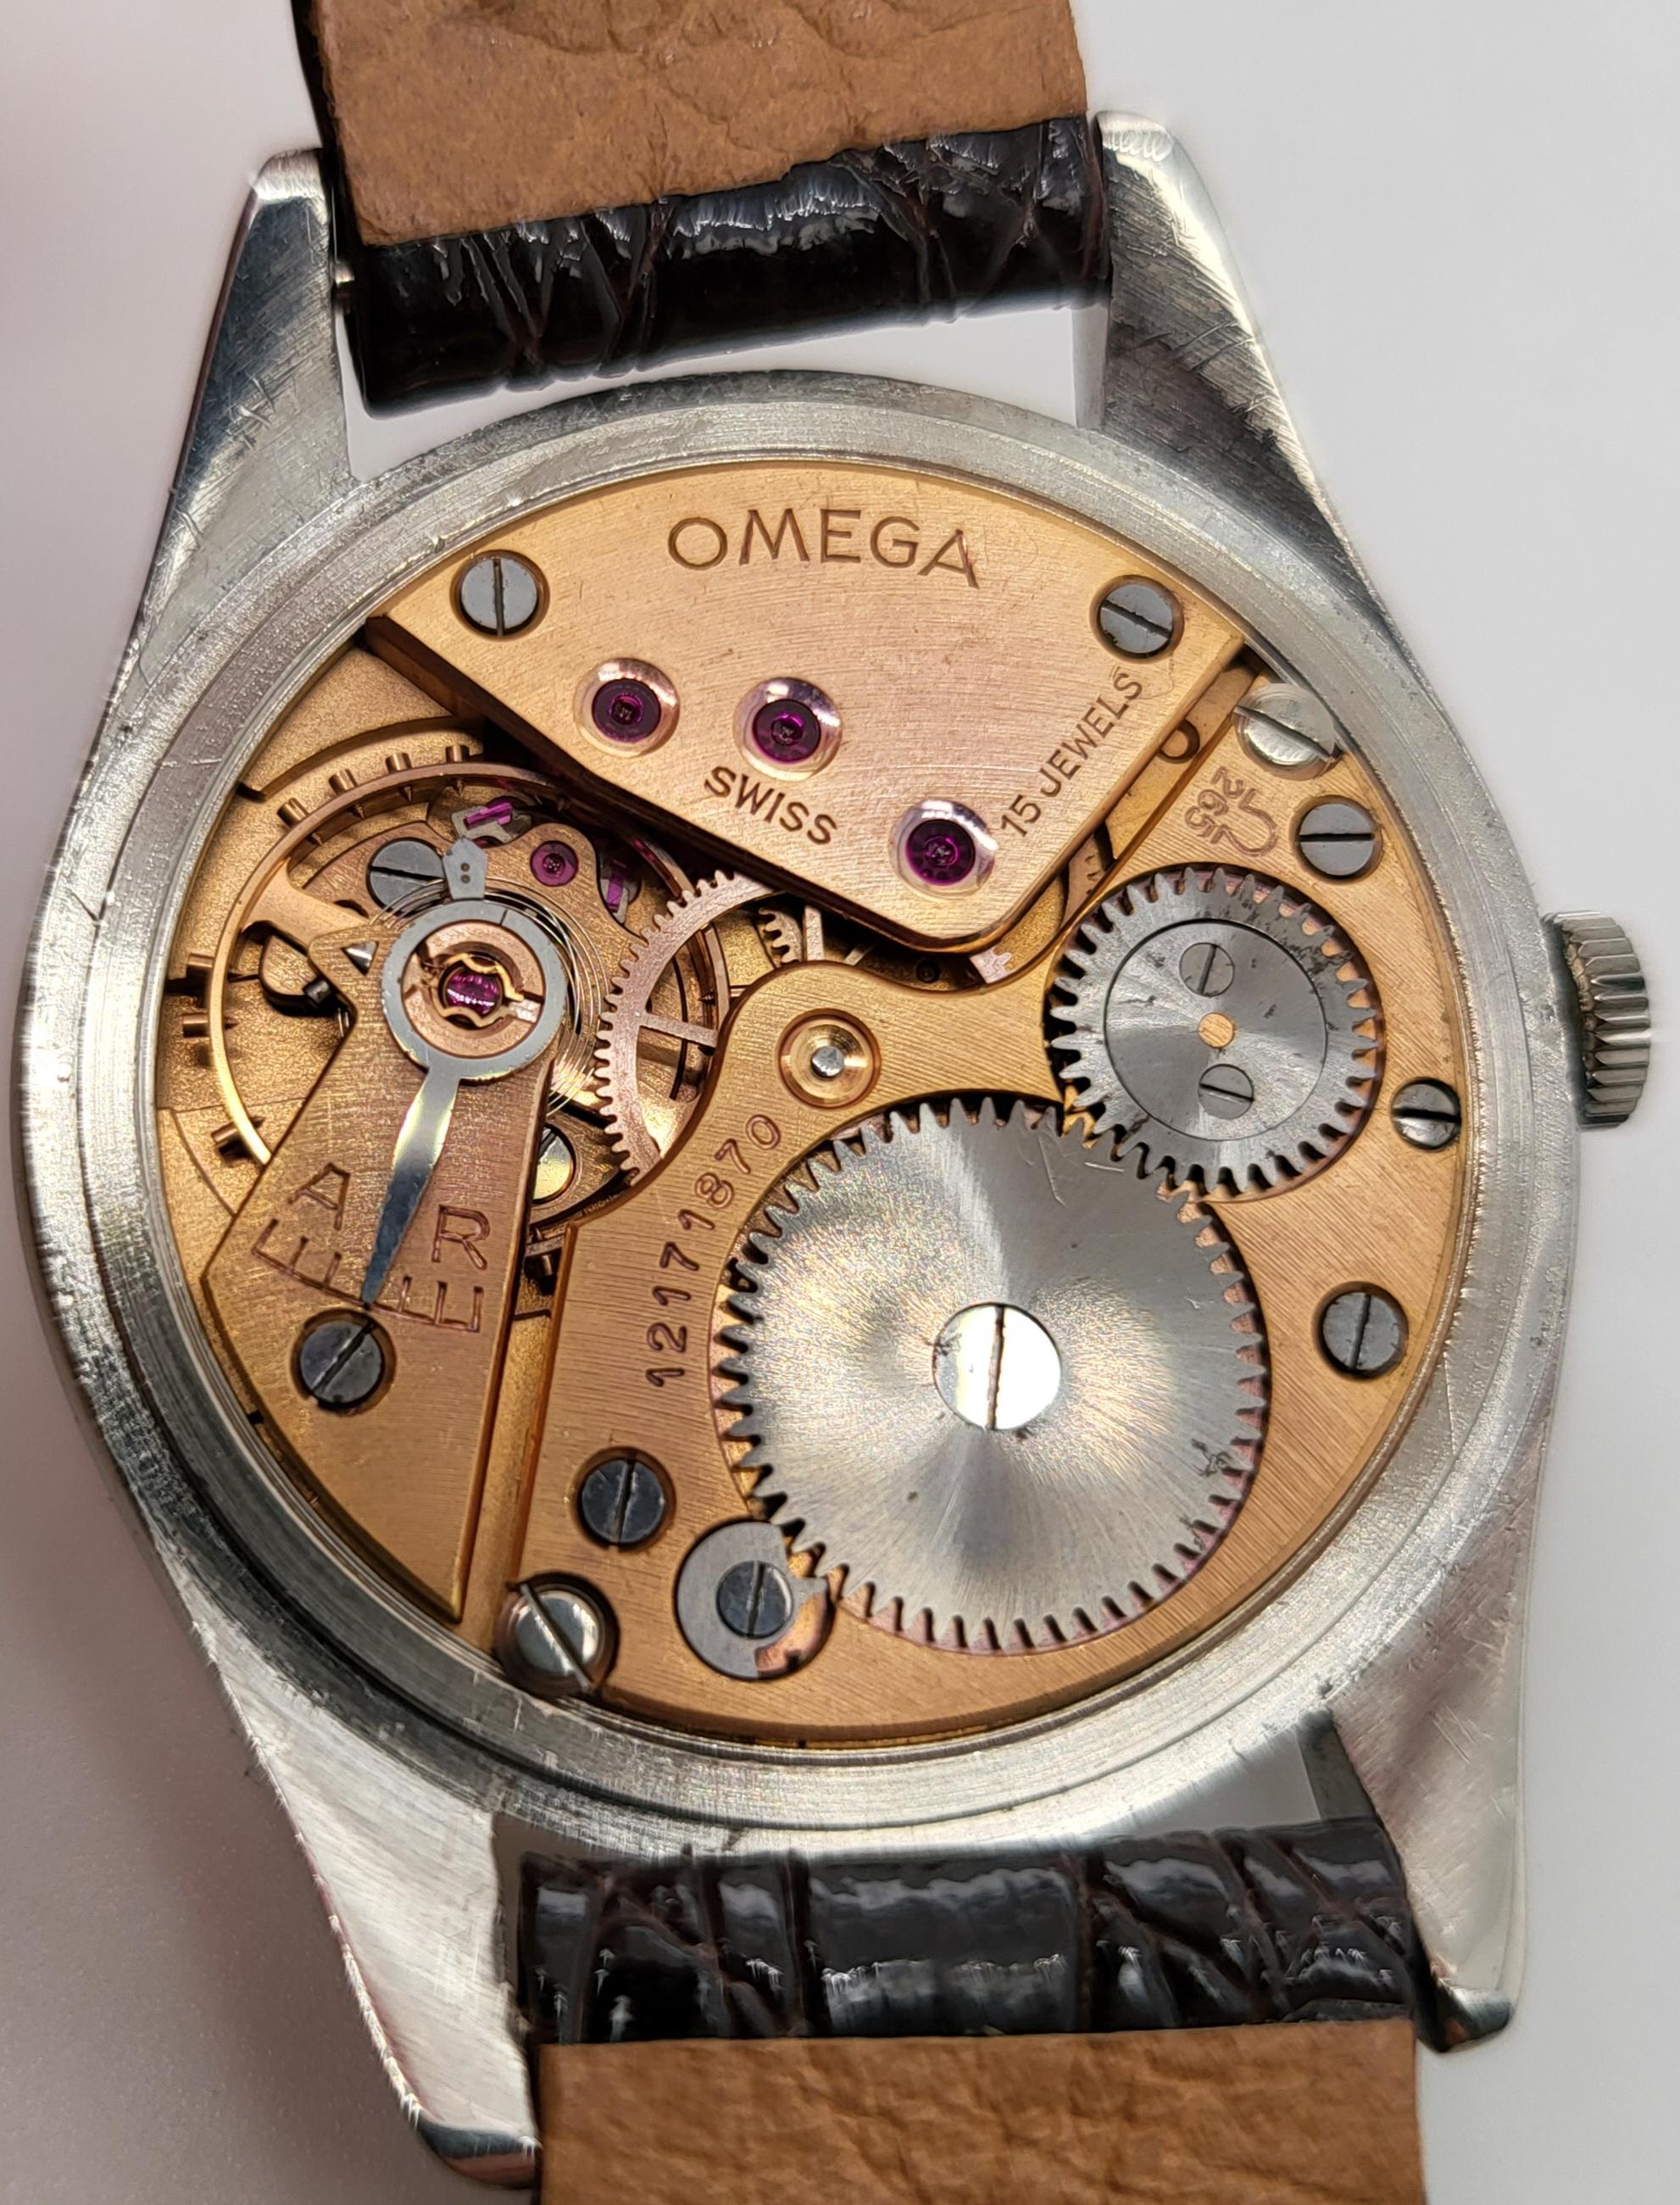 In Perfect Condition Steel Omega Reference 2503-10, Mechanical Cal.265 6